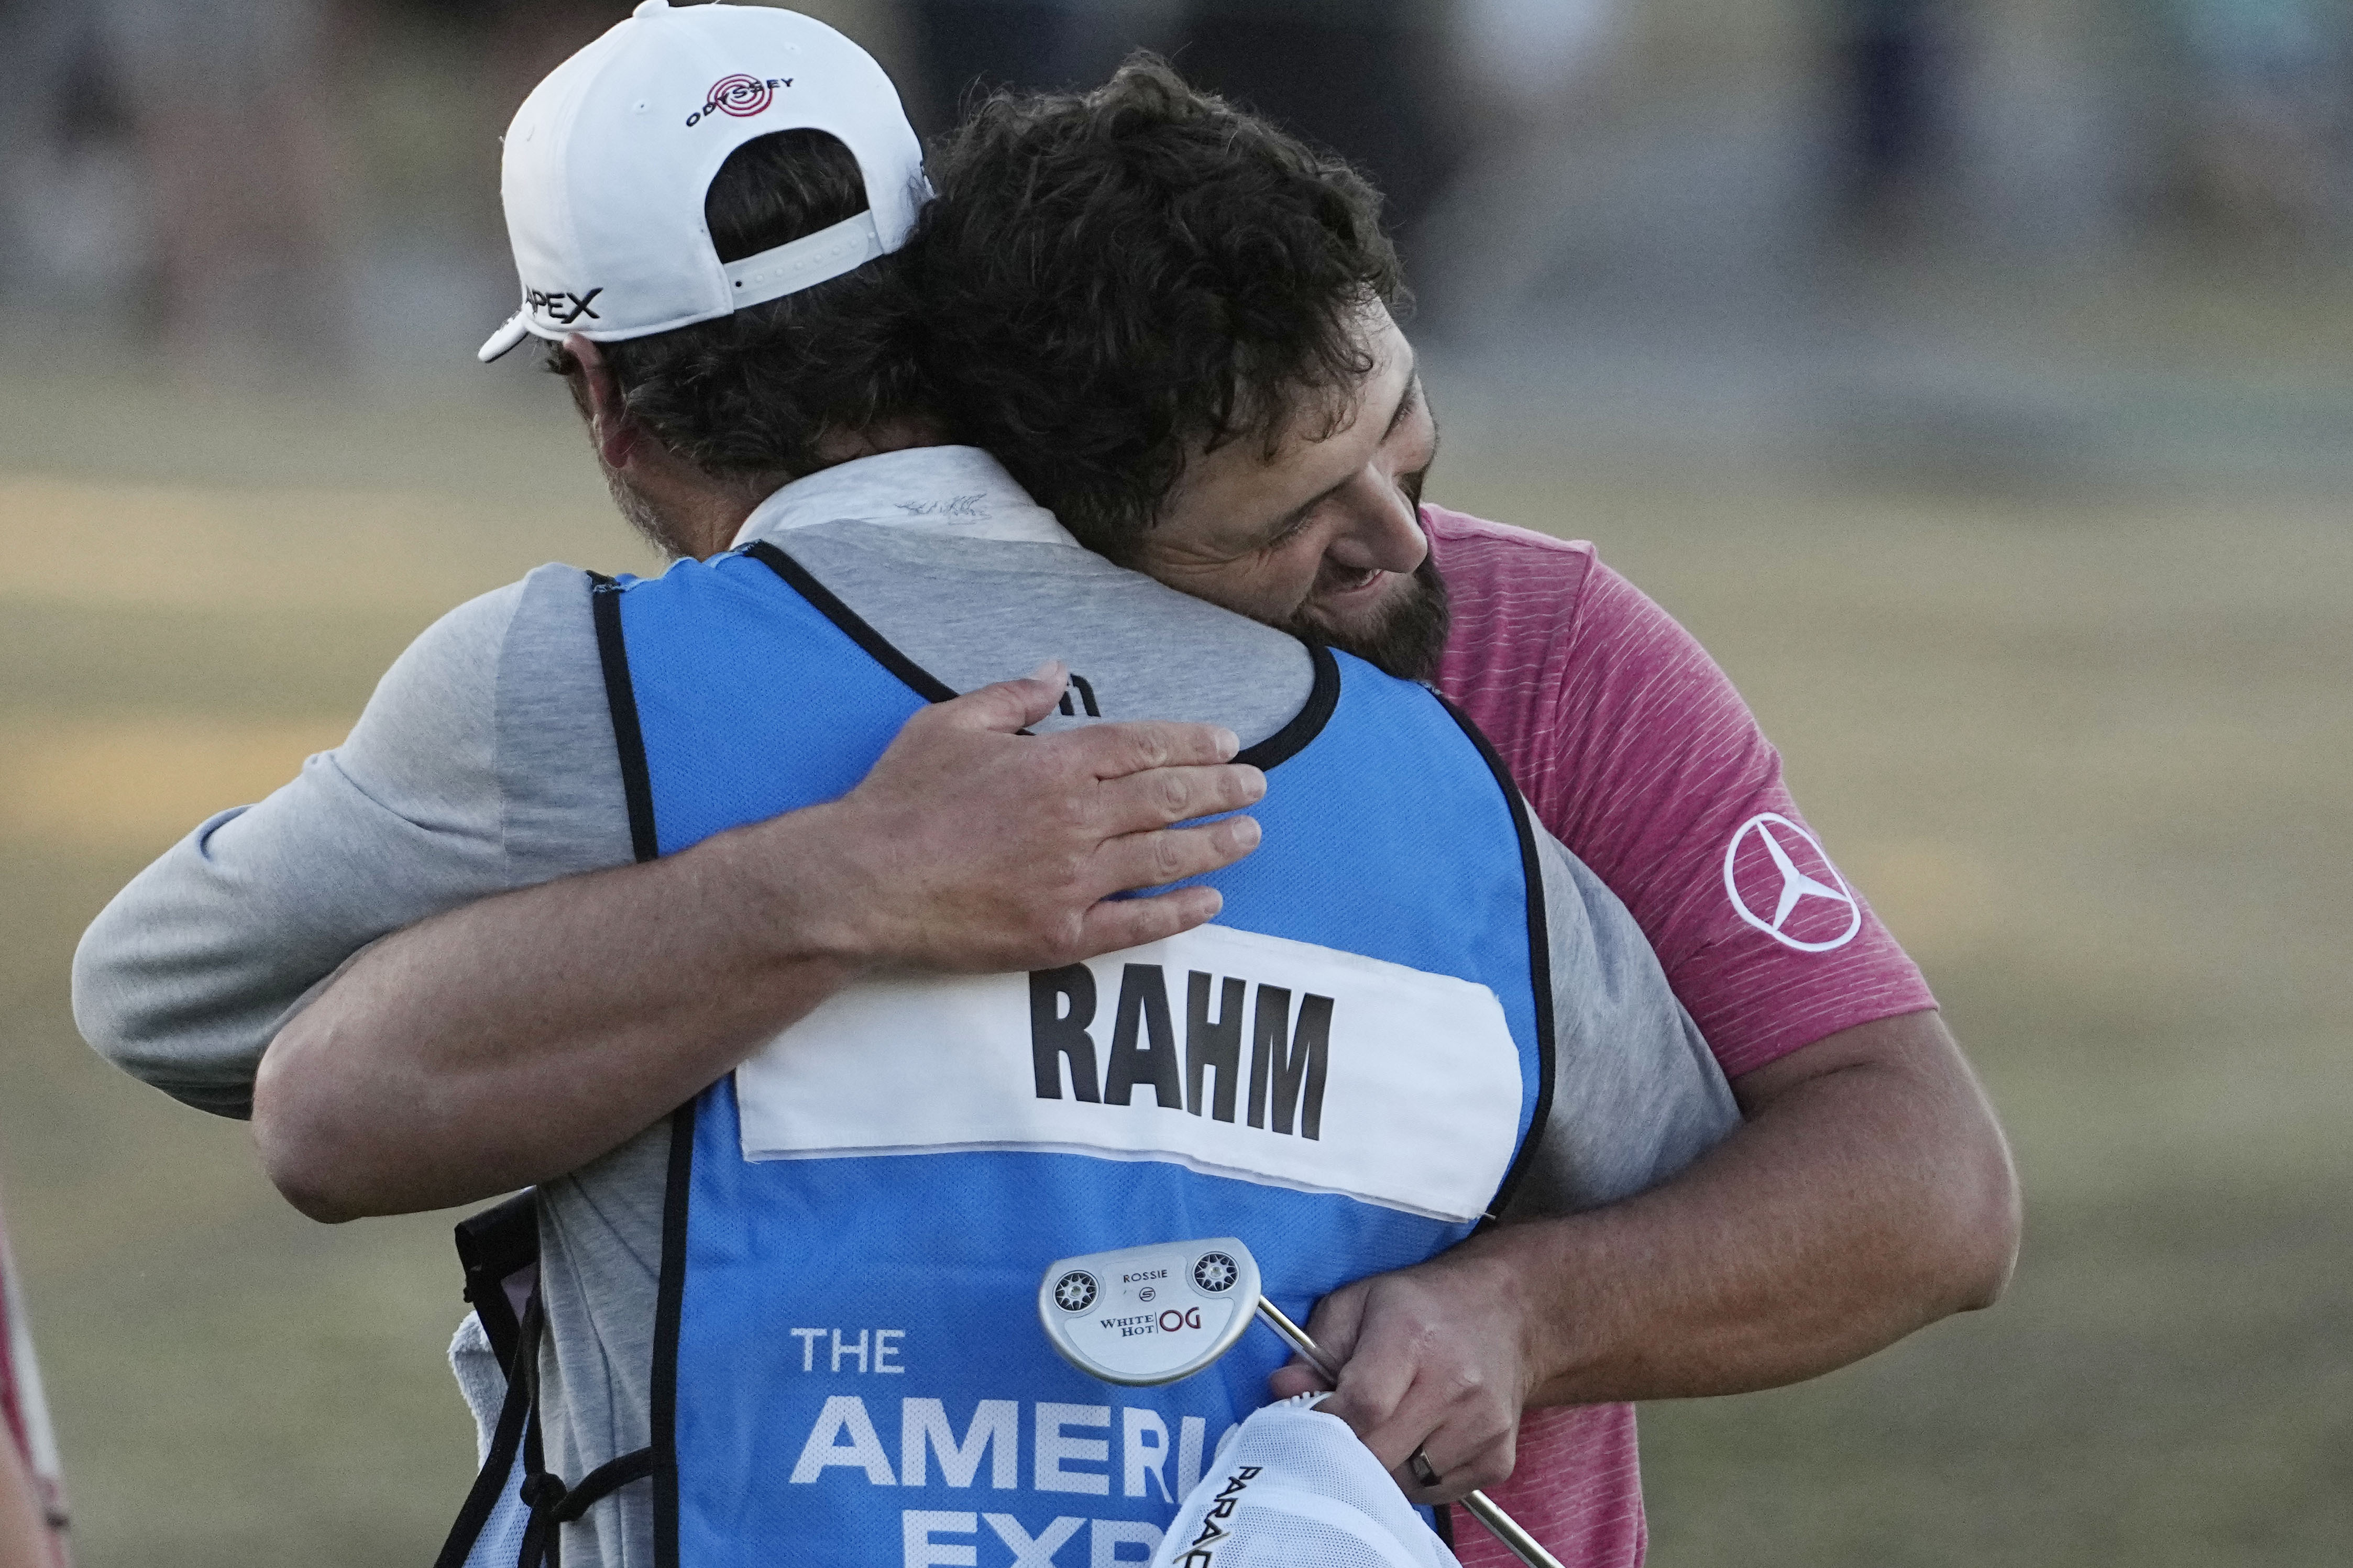 Rahm pumped up by 1-stroke victory